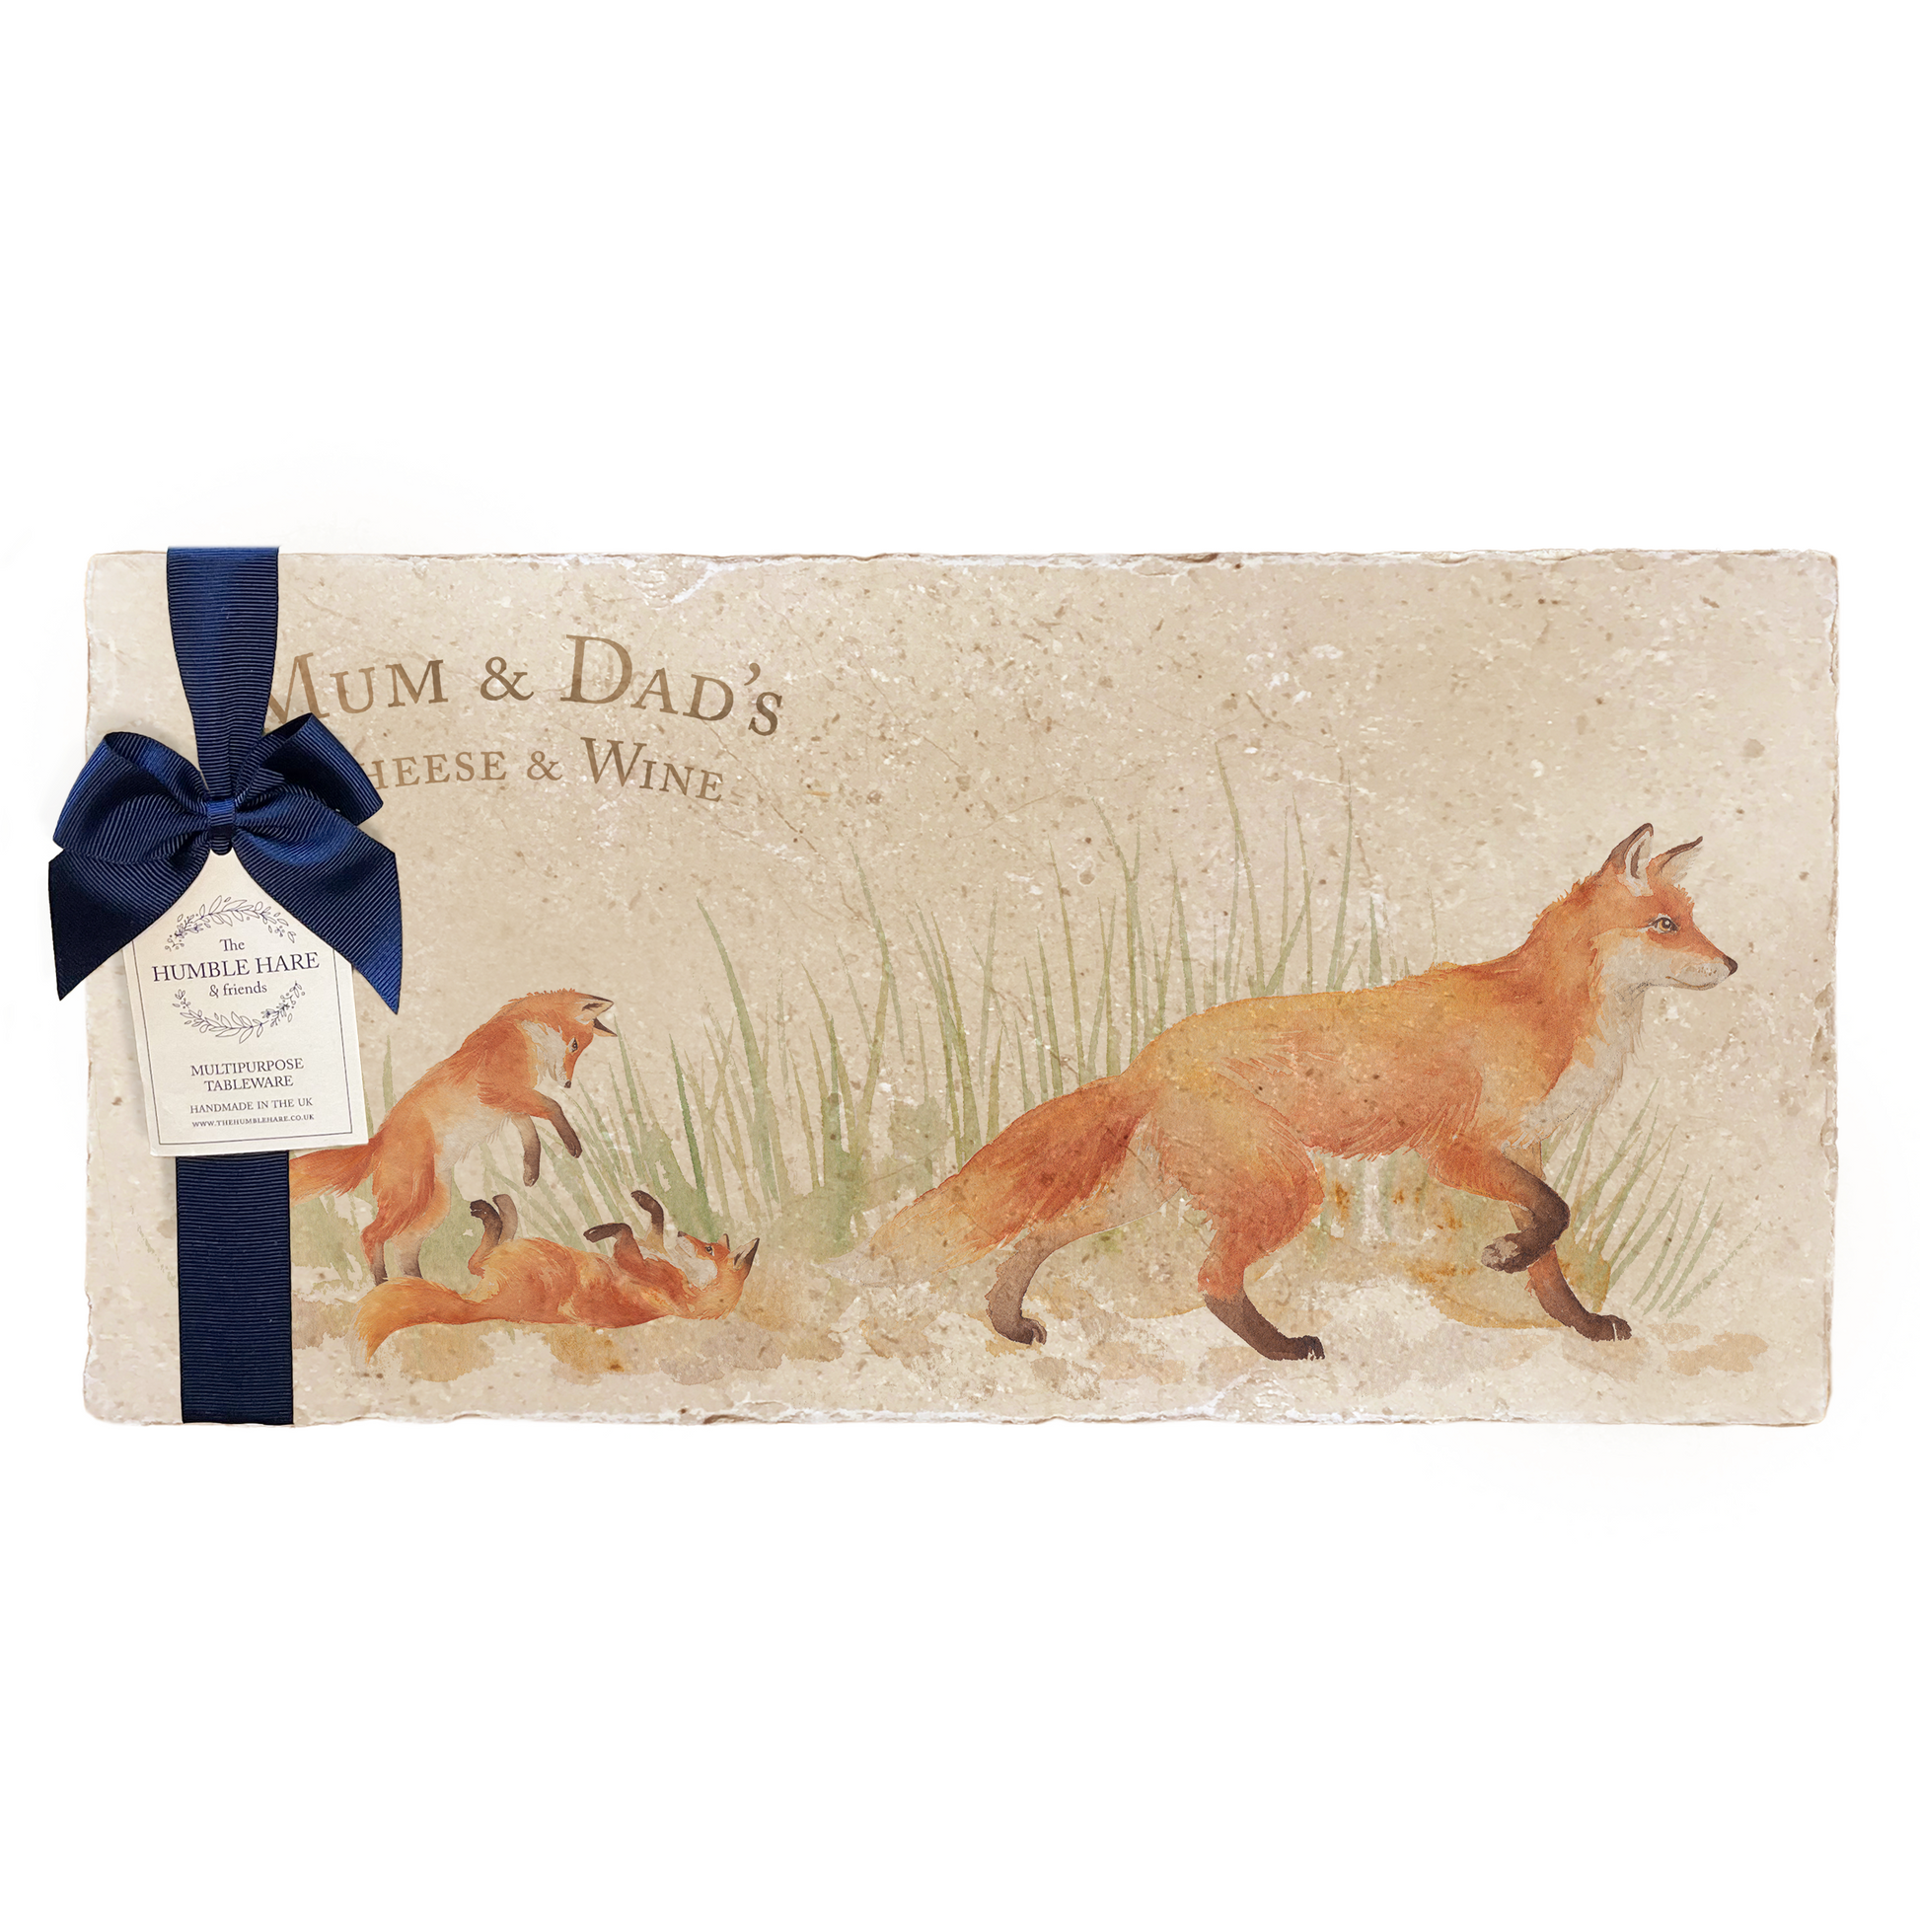 A personalised rectangular marble sharing platter featuring a fox design, packaged with a luxurious dark blue bow and branded gift tag.